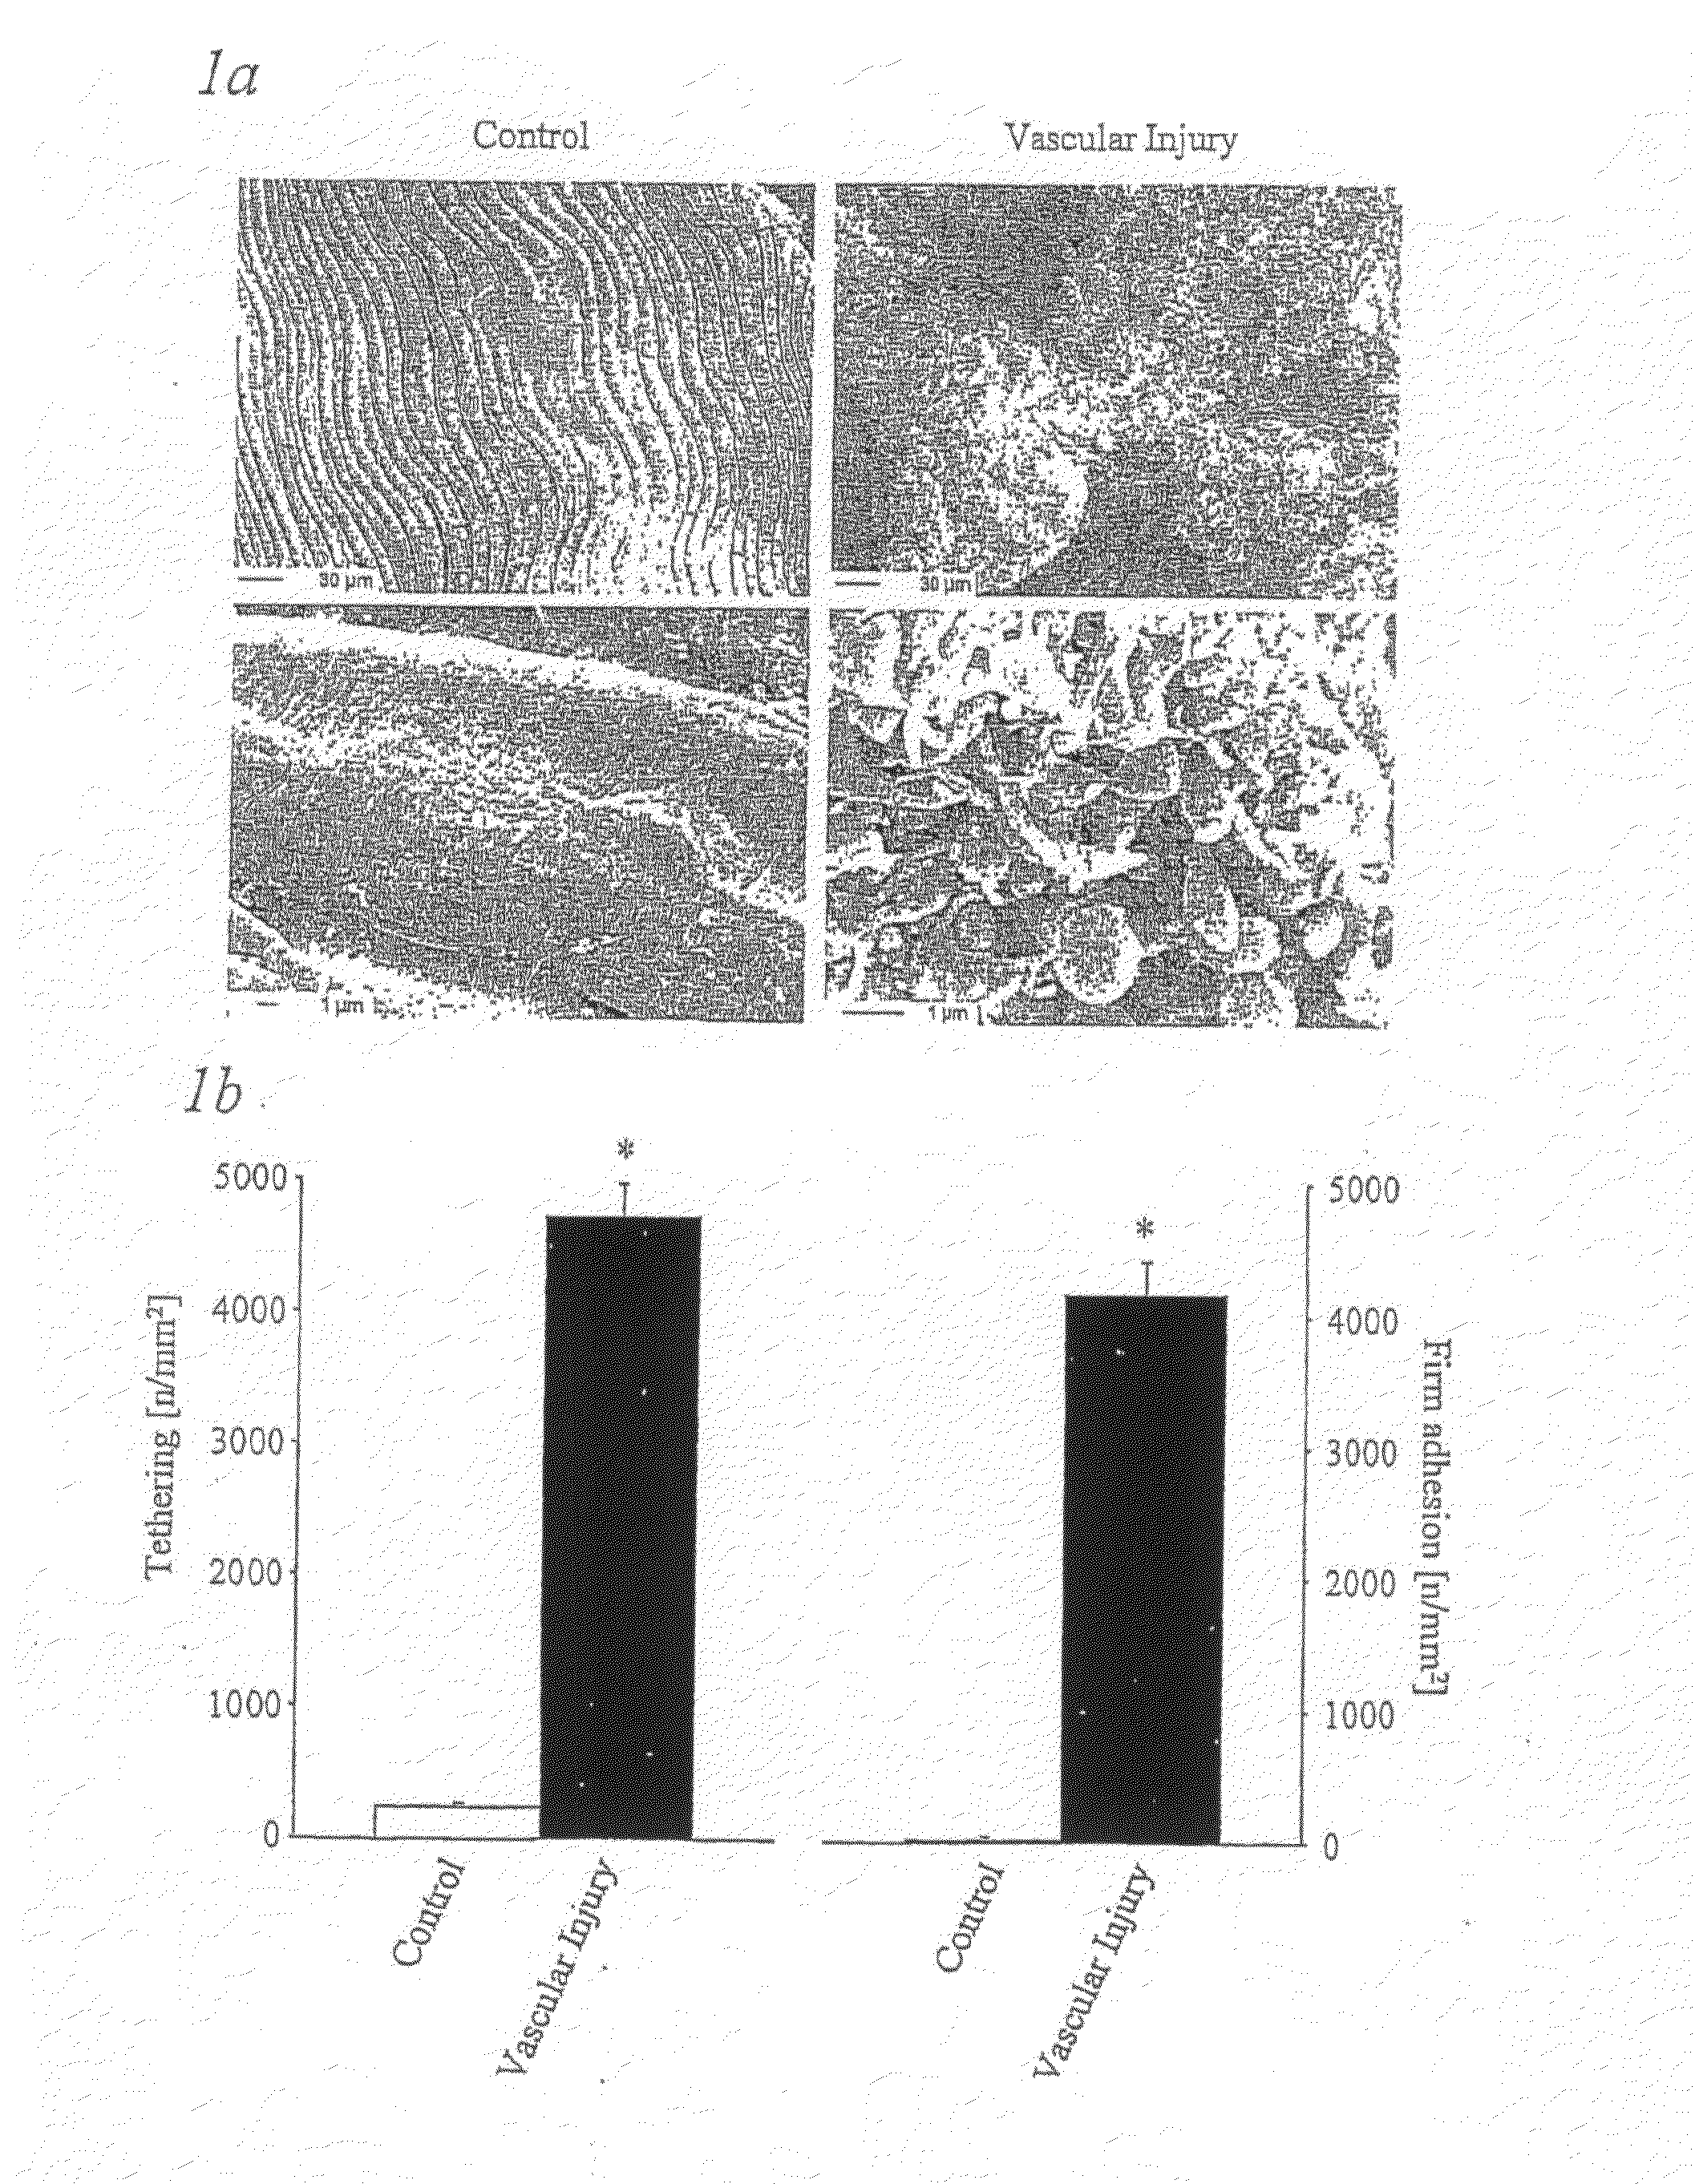 Methods, products and uses involving platelets and/or the vasculature